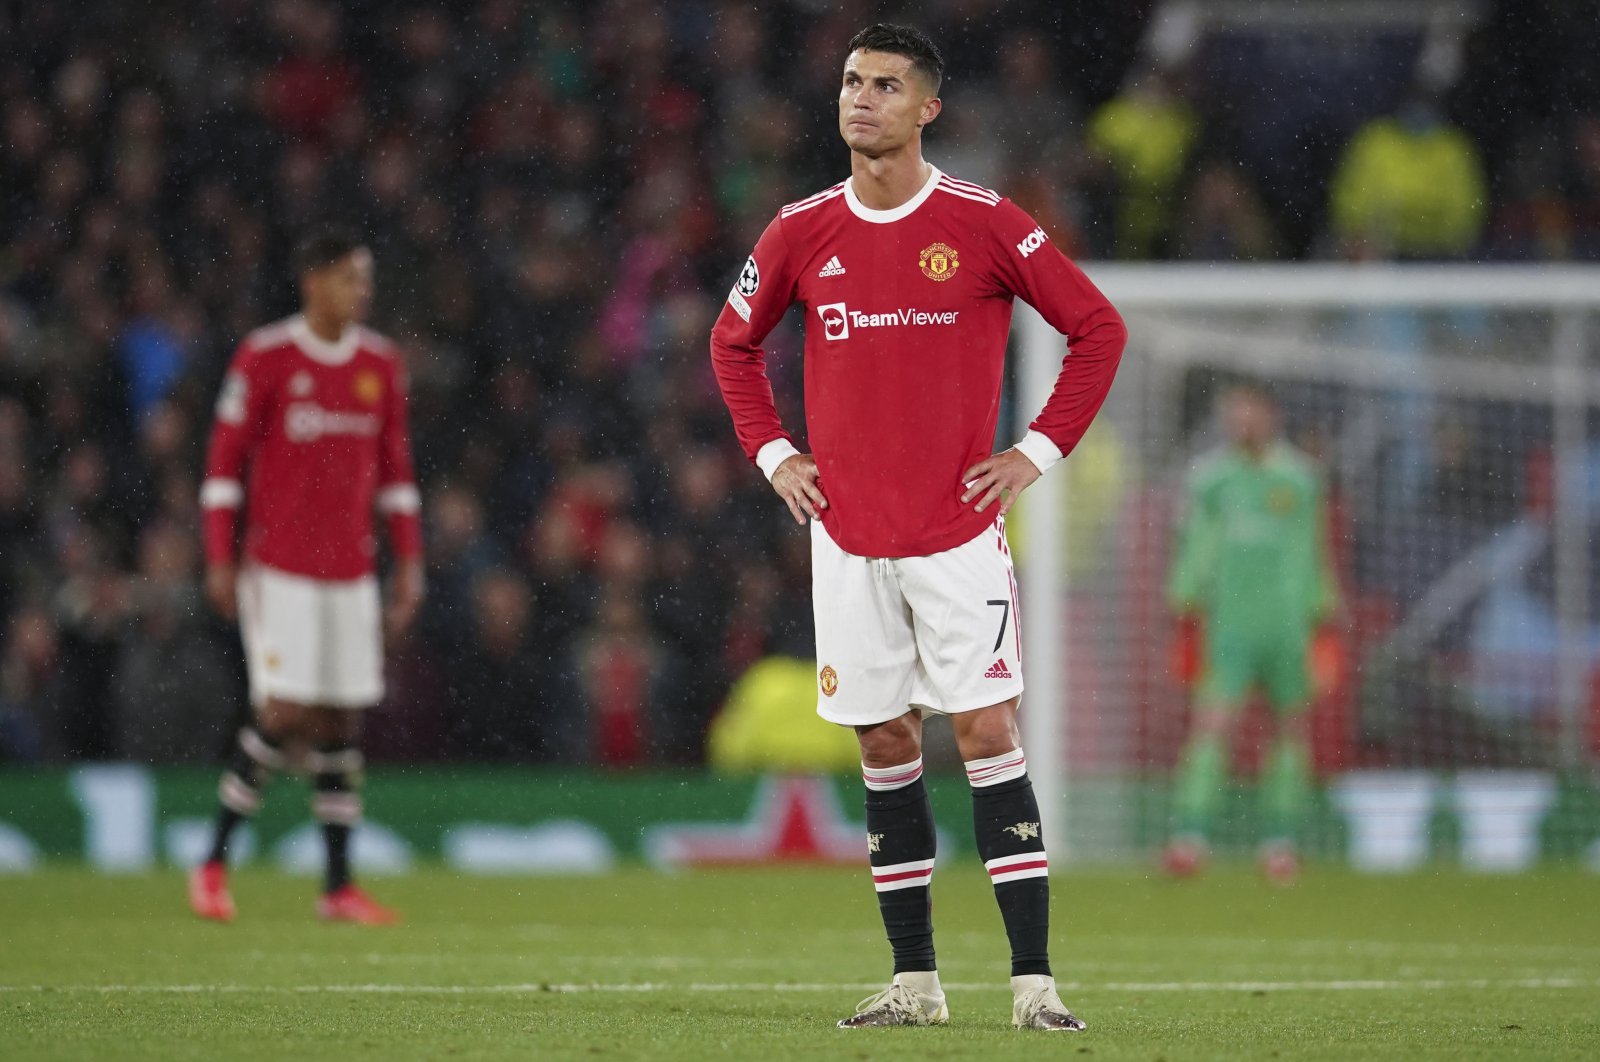 Manchester United's Cristiano Ronaldo reacts during a Champions League match against Villarreal at Old Trafford, Manchester, England, Sept. 29, 2021. (AP Photo)